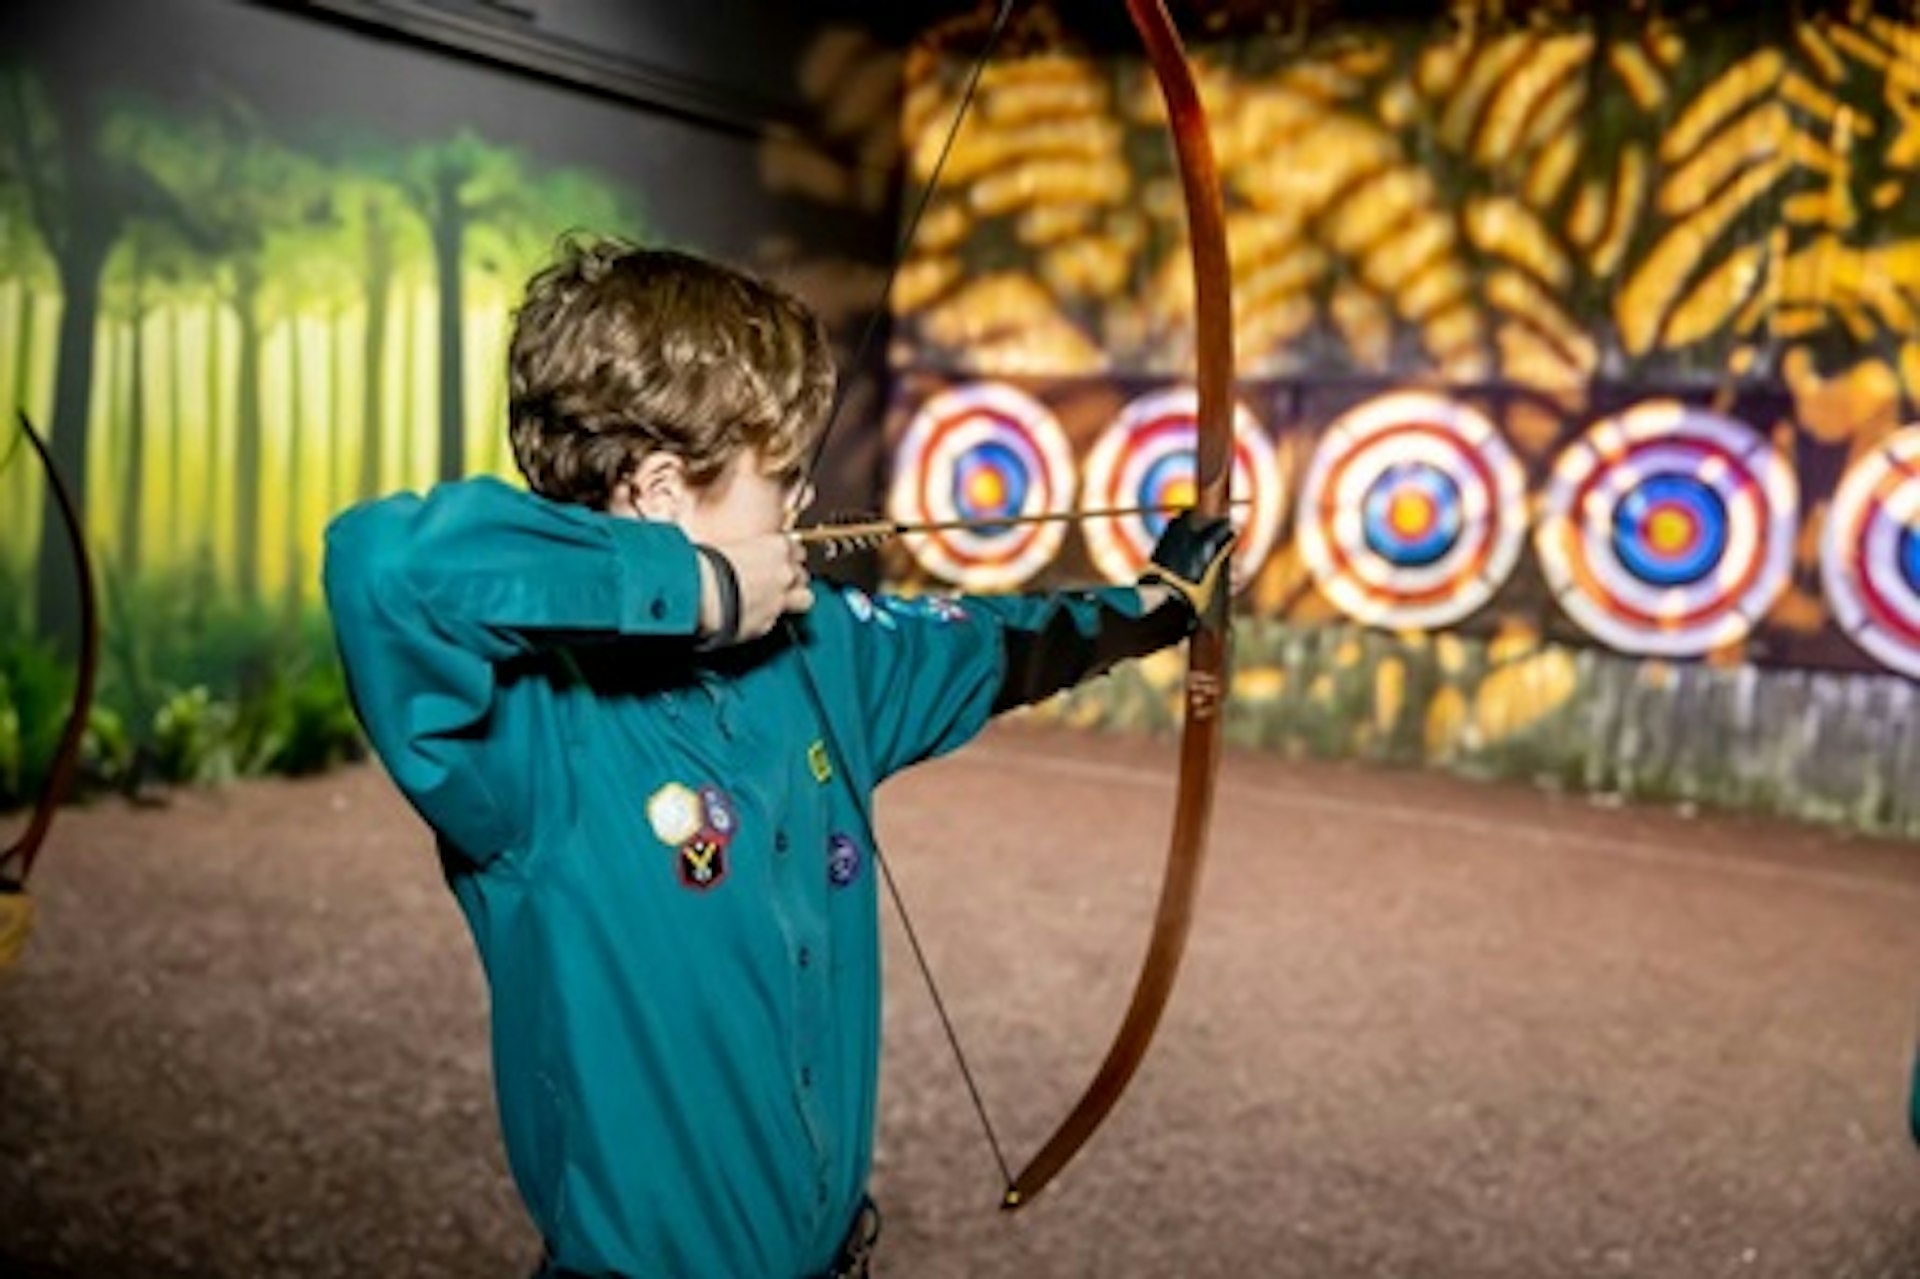 Archery Experience at The Bear Grylls Adventure 1